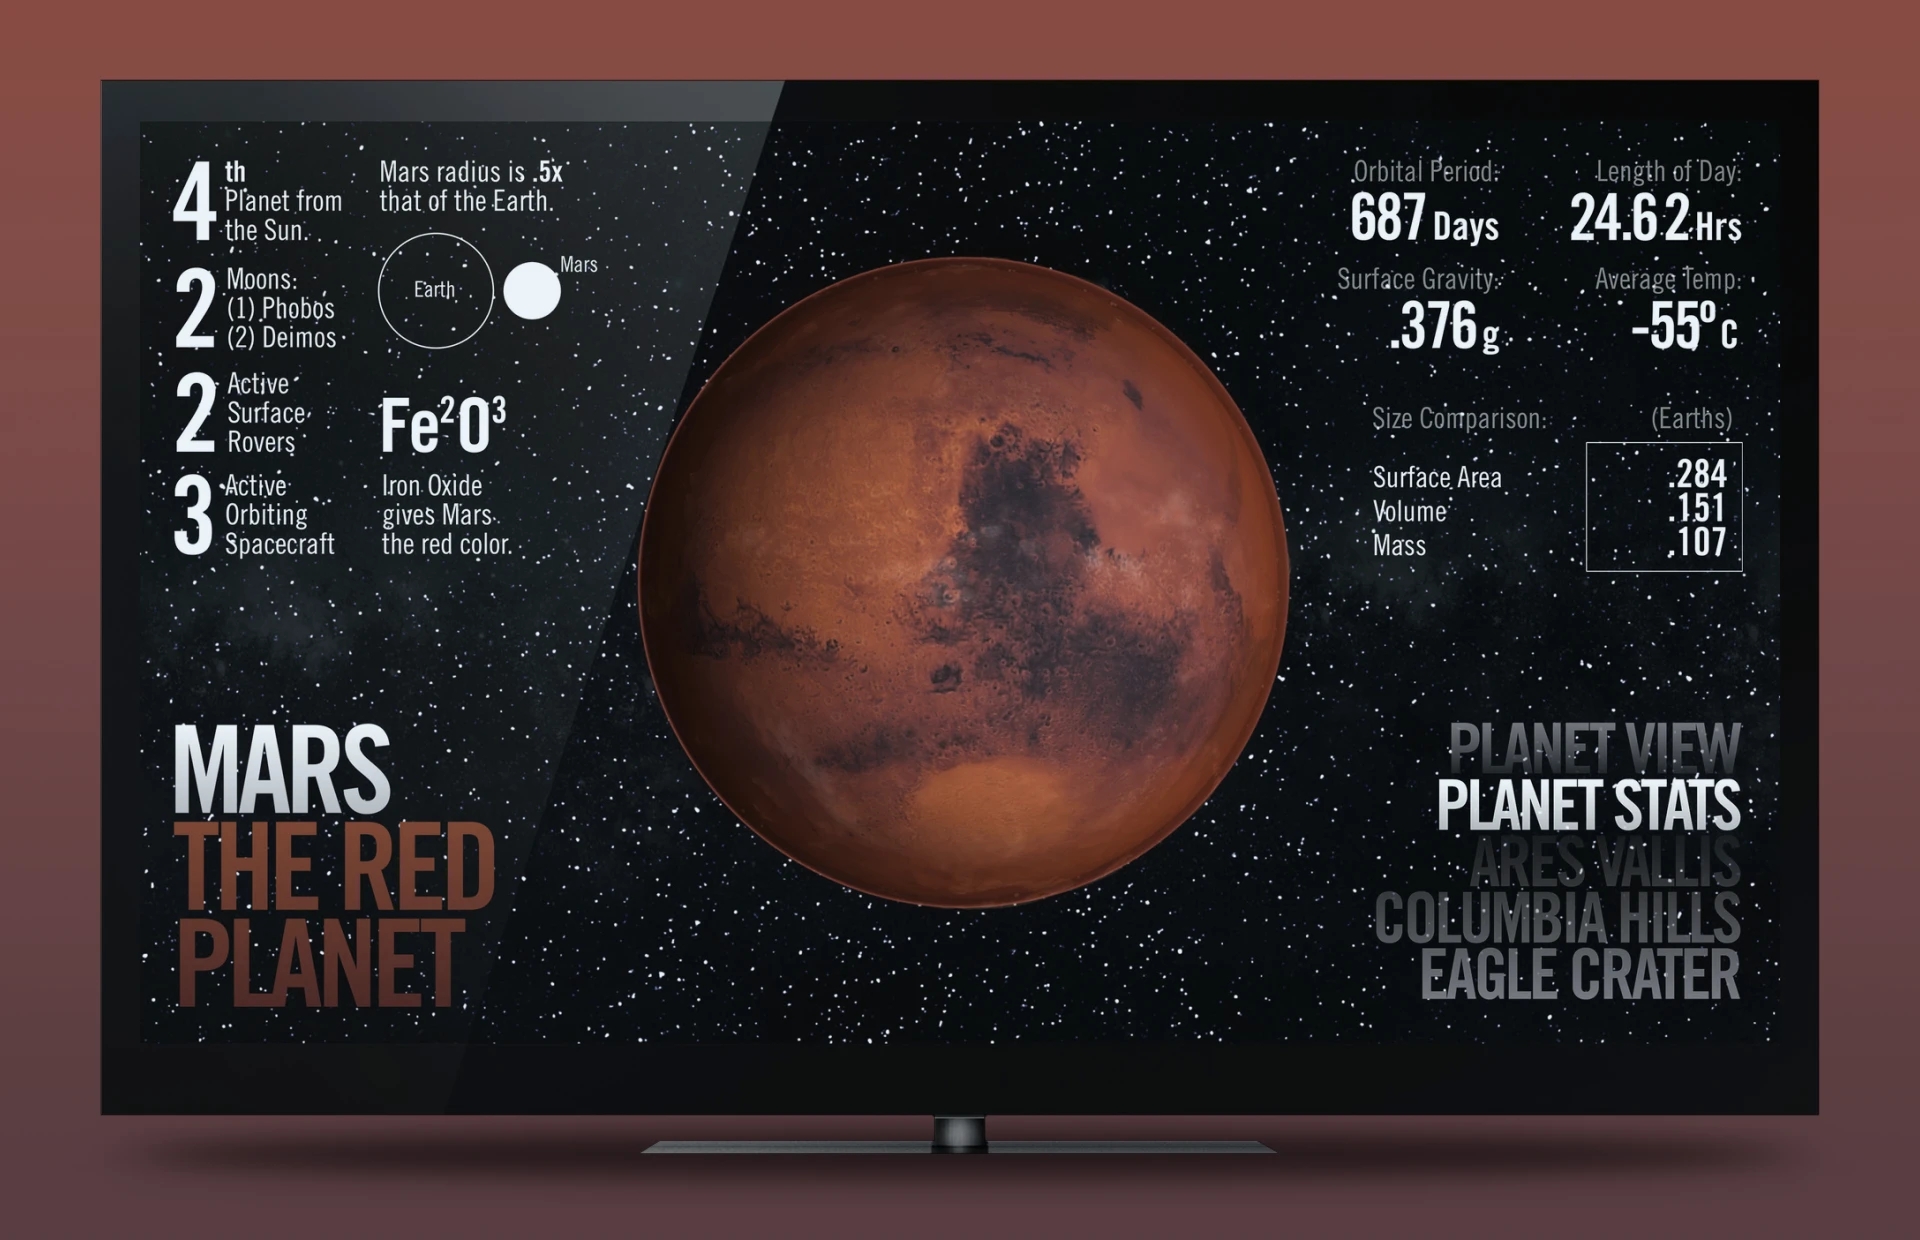 composite image showing a TV running the armchair astronaut application. A 3D image of the planet mars is centered with 'Mars The Red Planet' text and various statistics